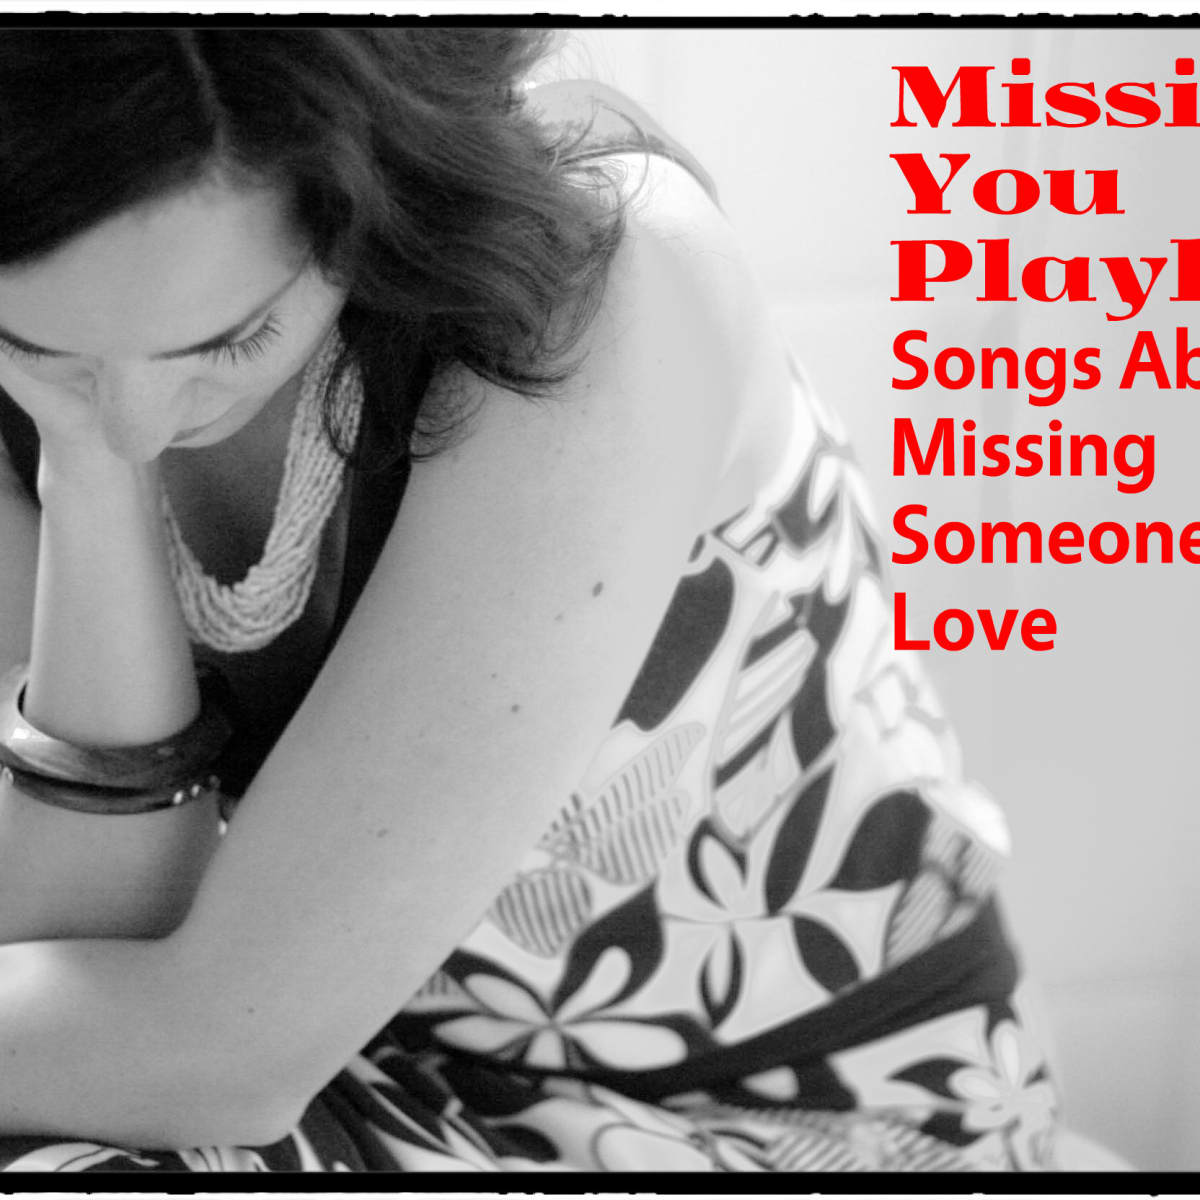 You with missing love lyrics songs Find song